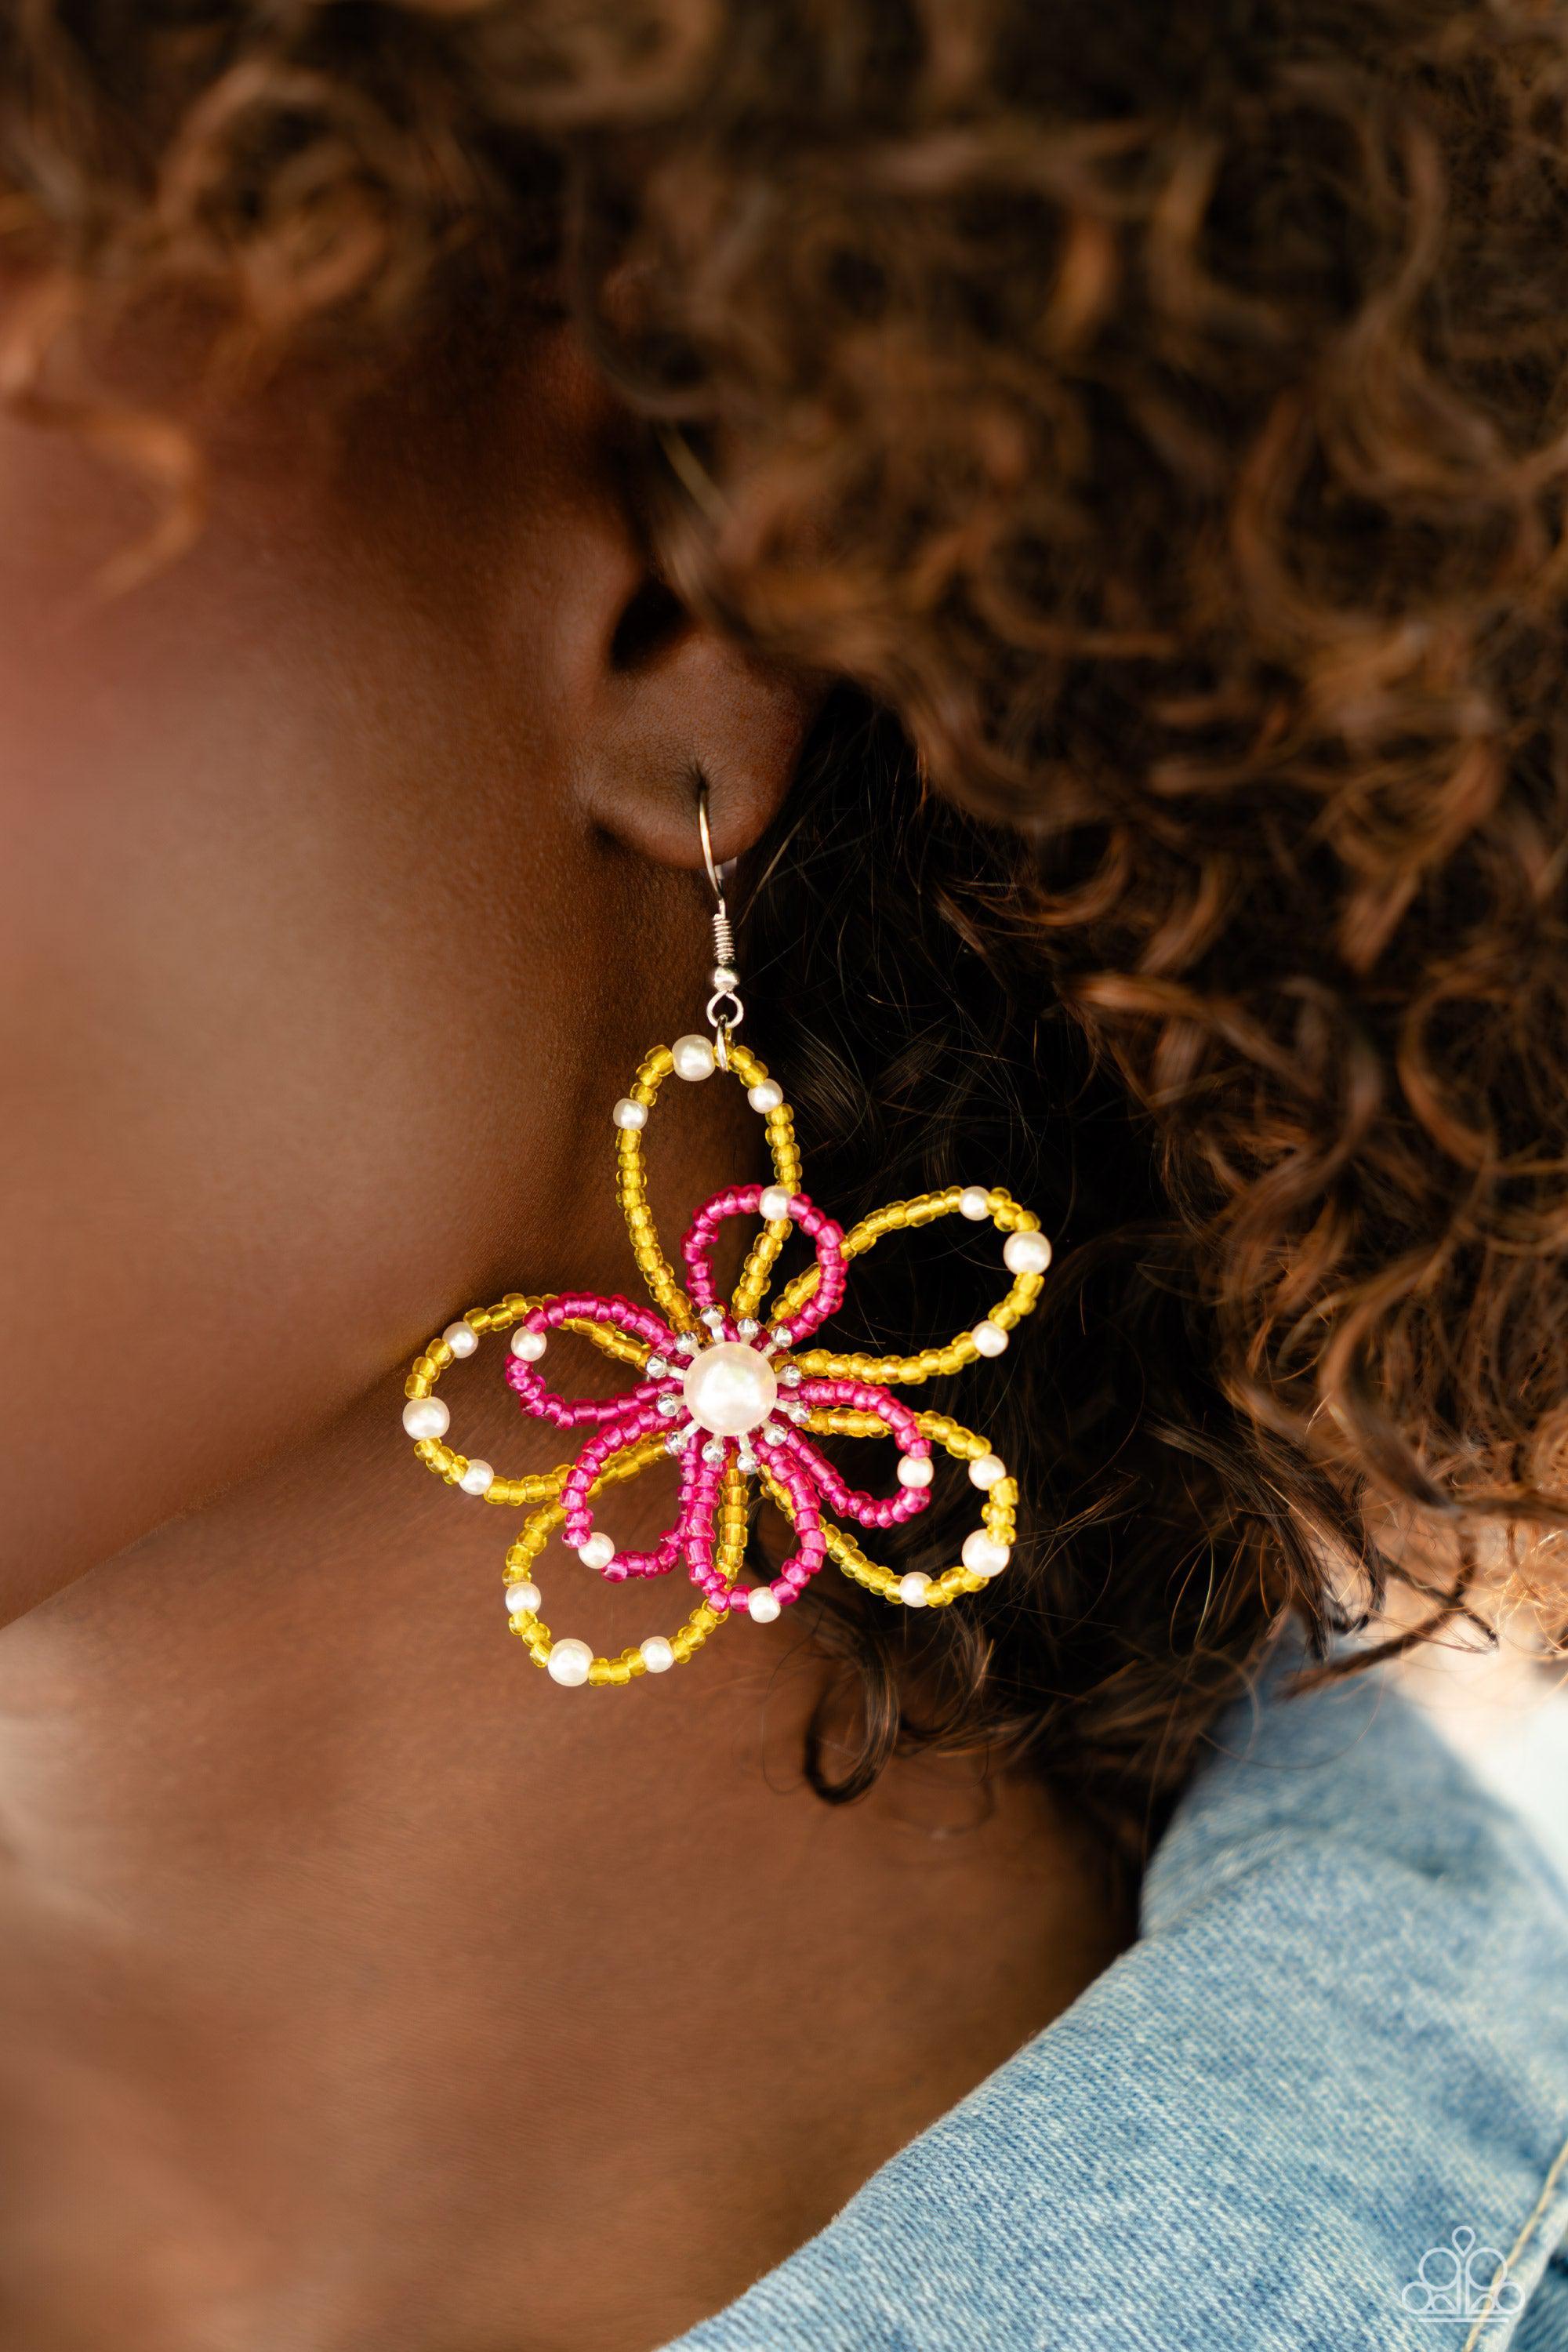 PEARL Crush Yellow & Pink Flower Earrings - Paparazzi Accessories- lightbox - CarasShop.com - $5 Jewelry by Cara Jewels